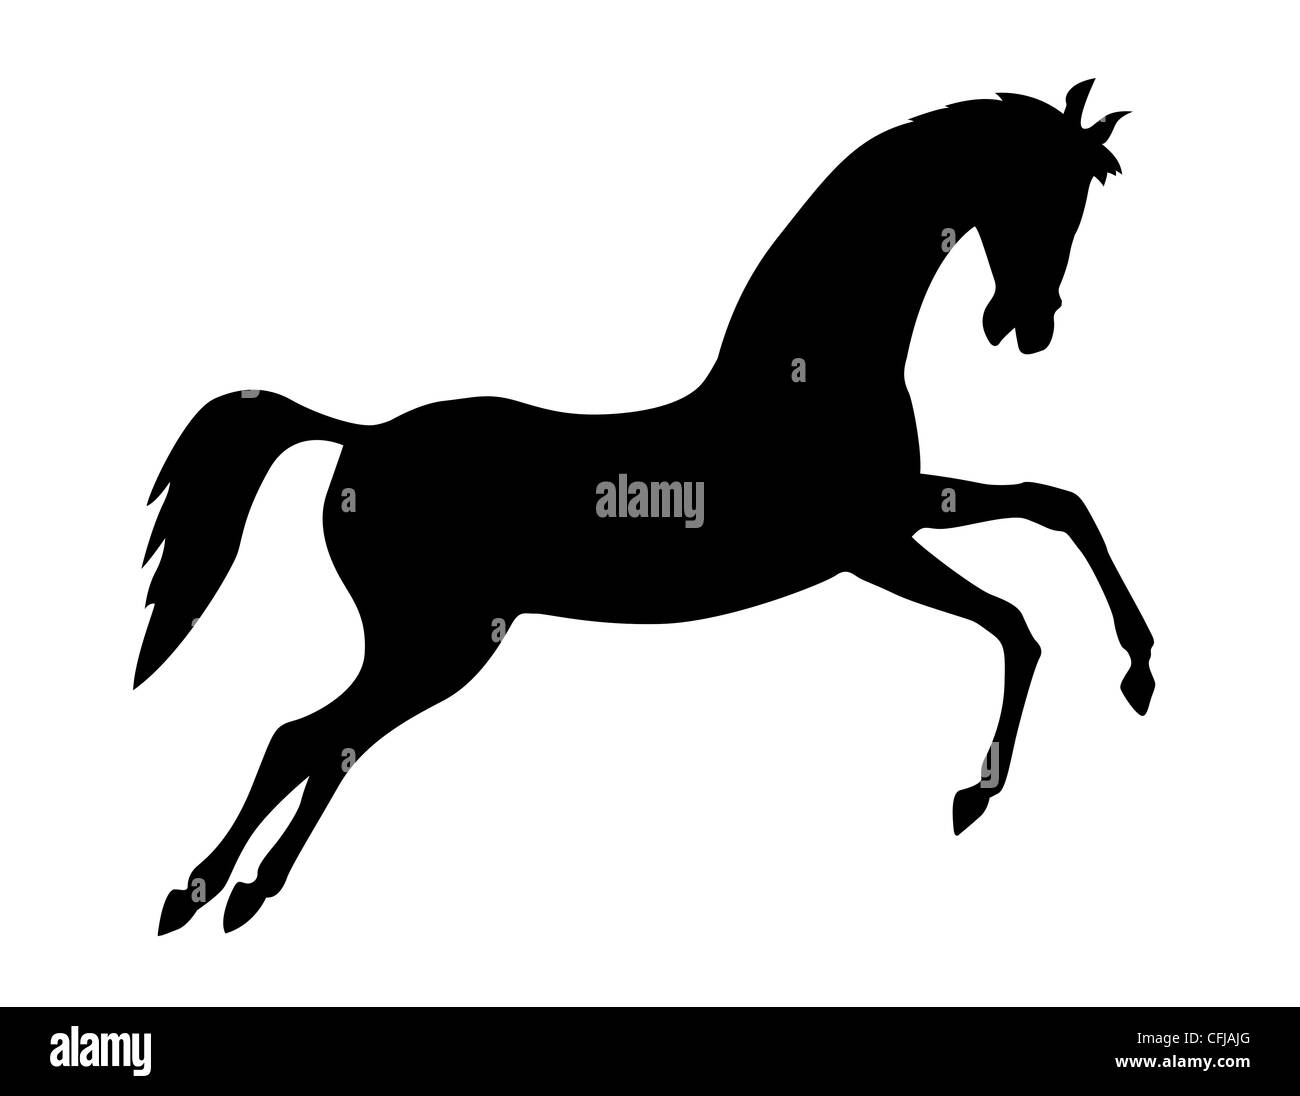 vector silhouette on white background Stock Photo - Alamy